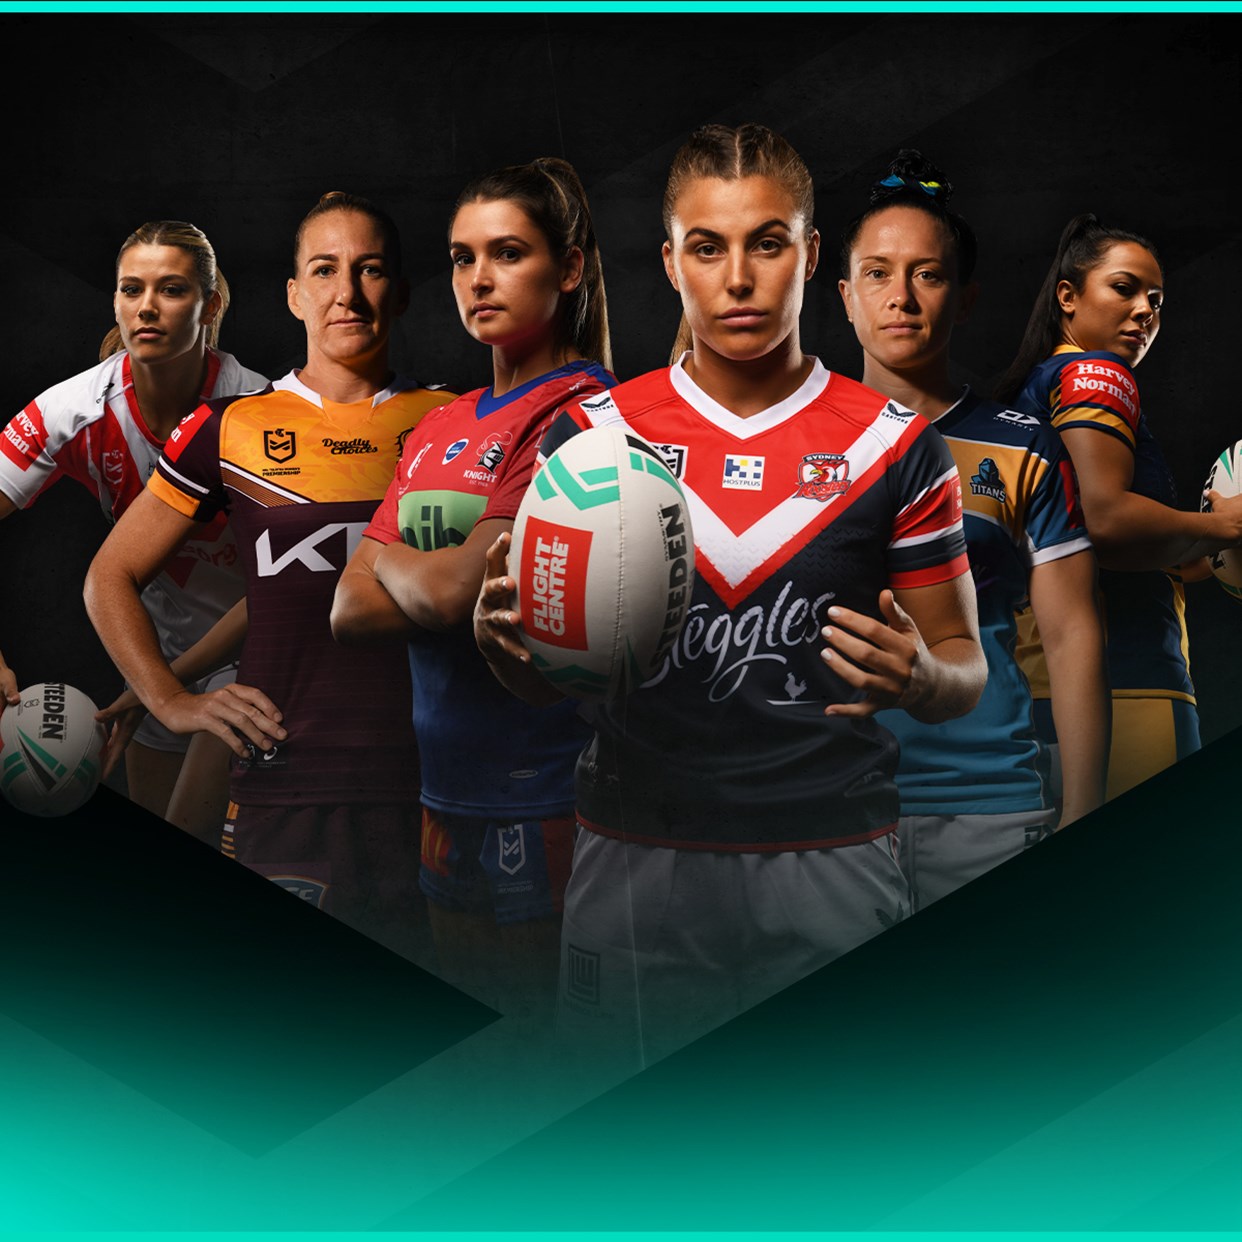 Where power meets passion. This is NRLW.